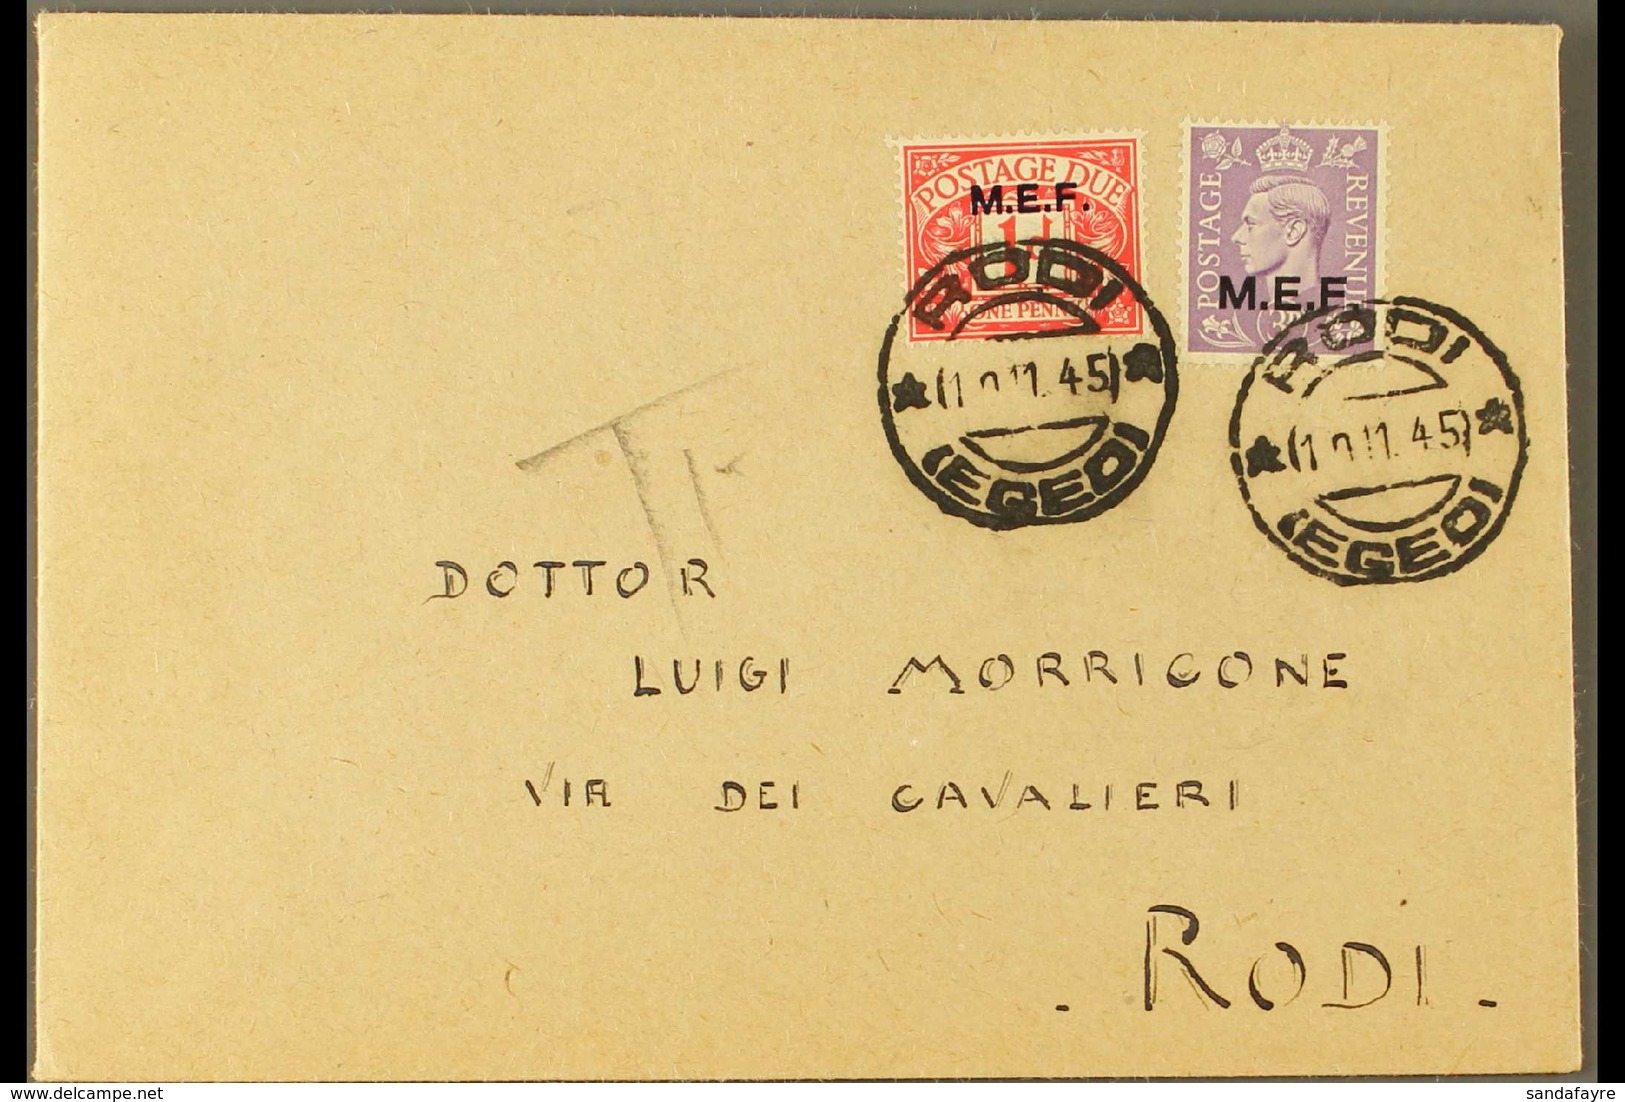 M.E.F. 1945, Two Attractive Envelopes, Each Bearing Postage Due 1d (one In Combination With Postage 3d), Tied Symi/Dodec - Italian Eastern Africa